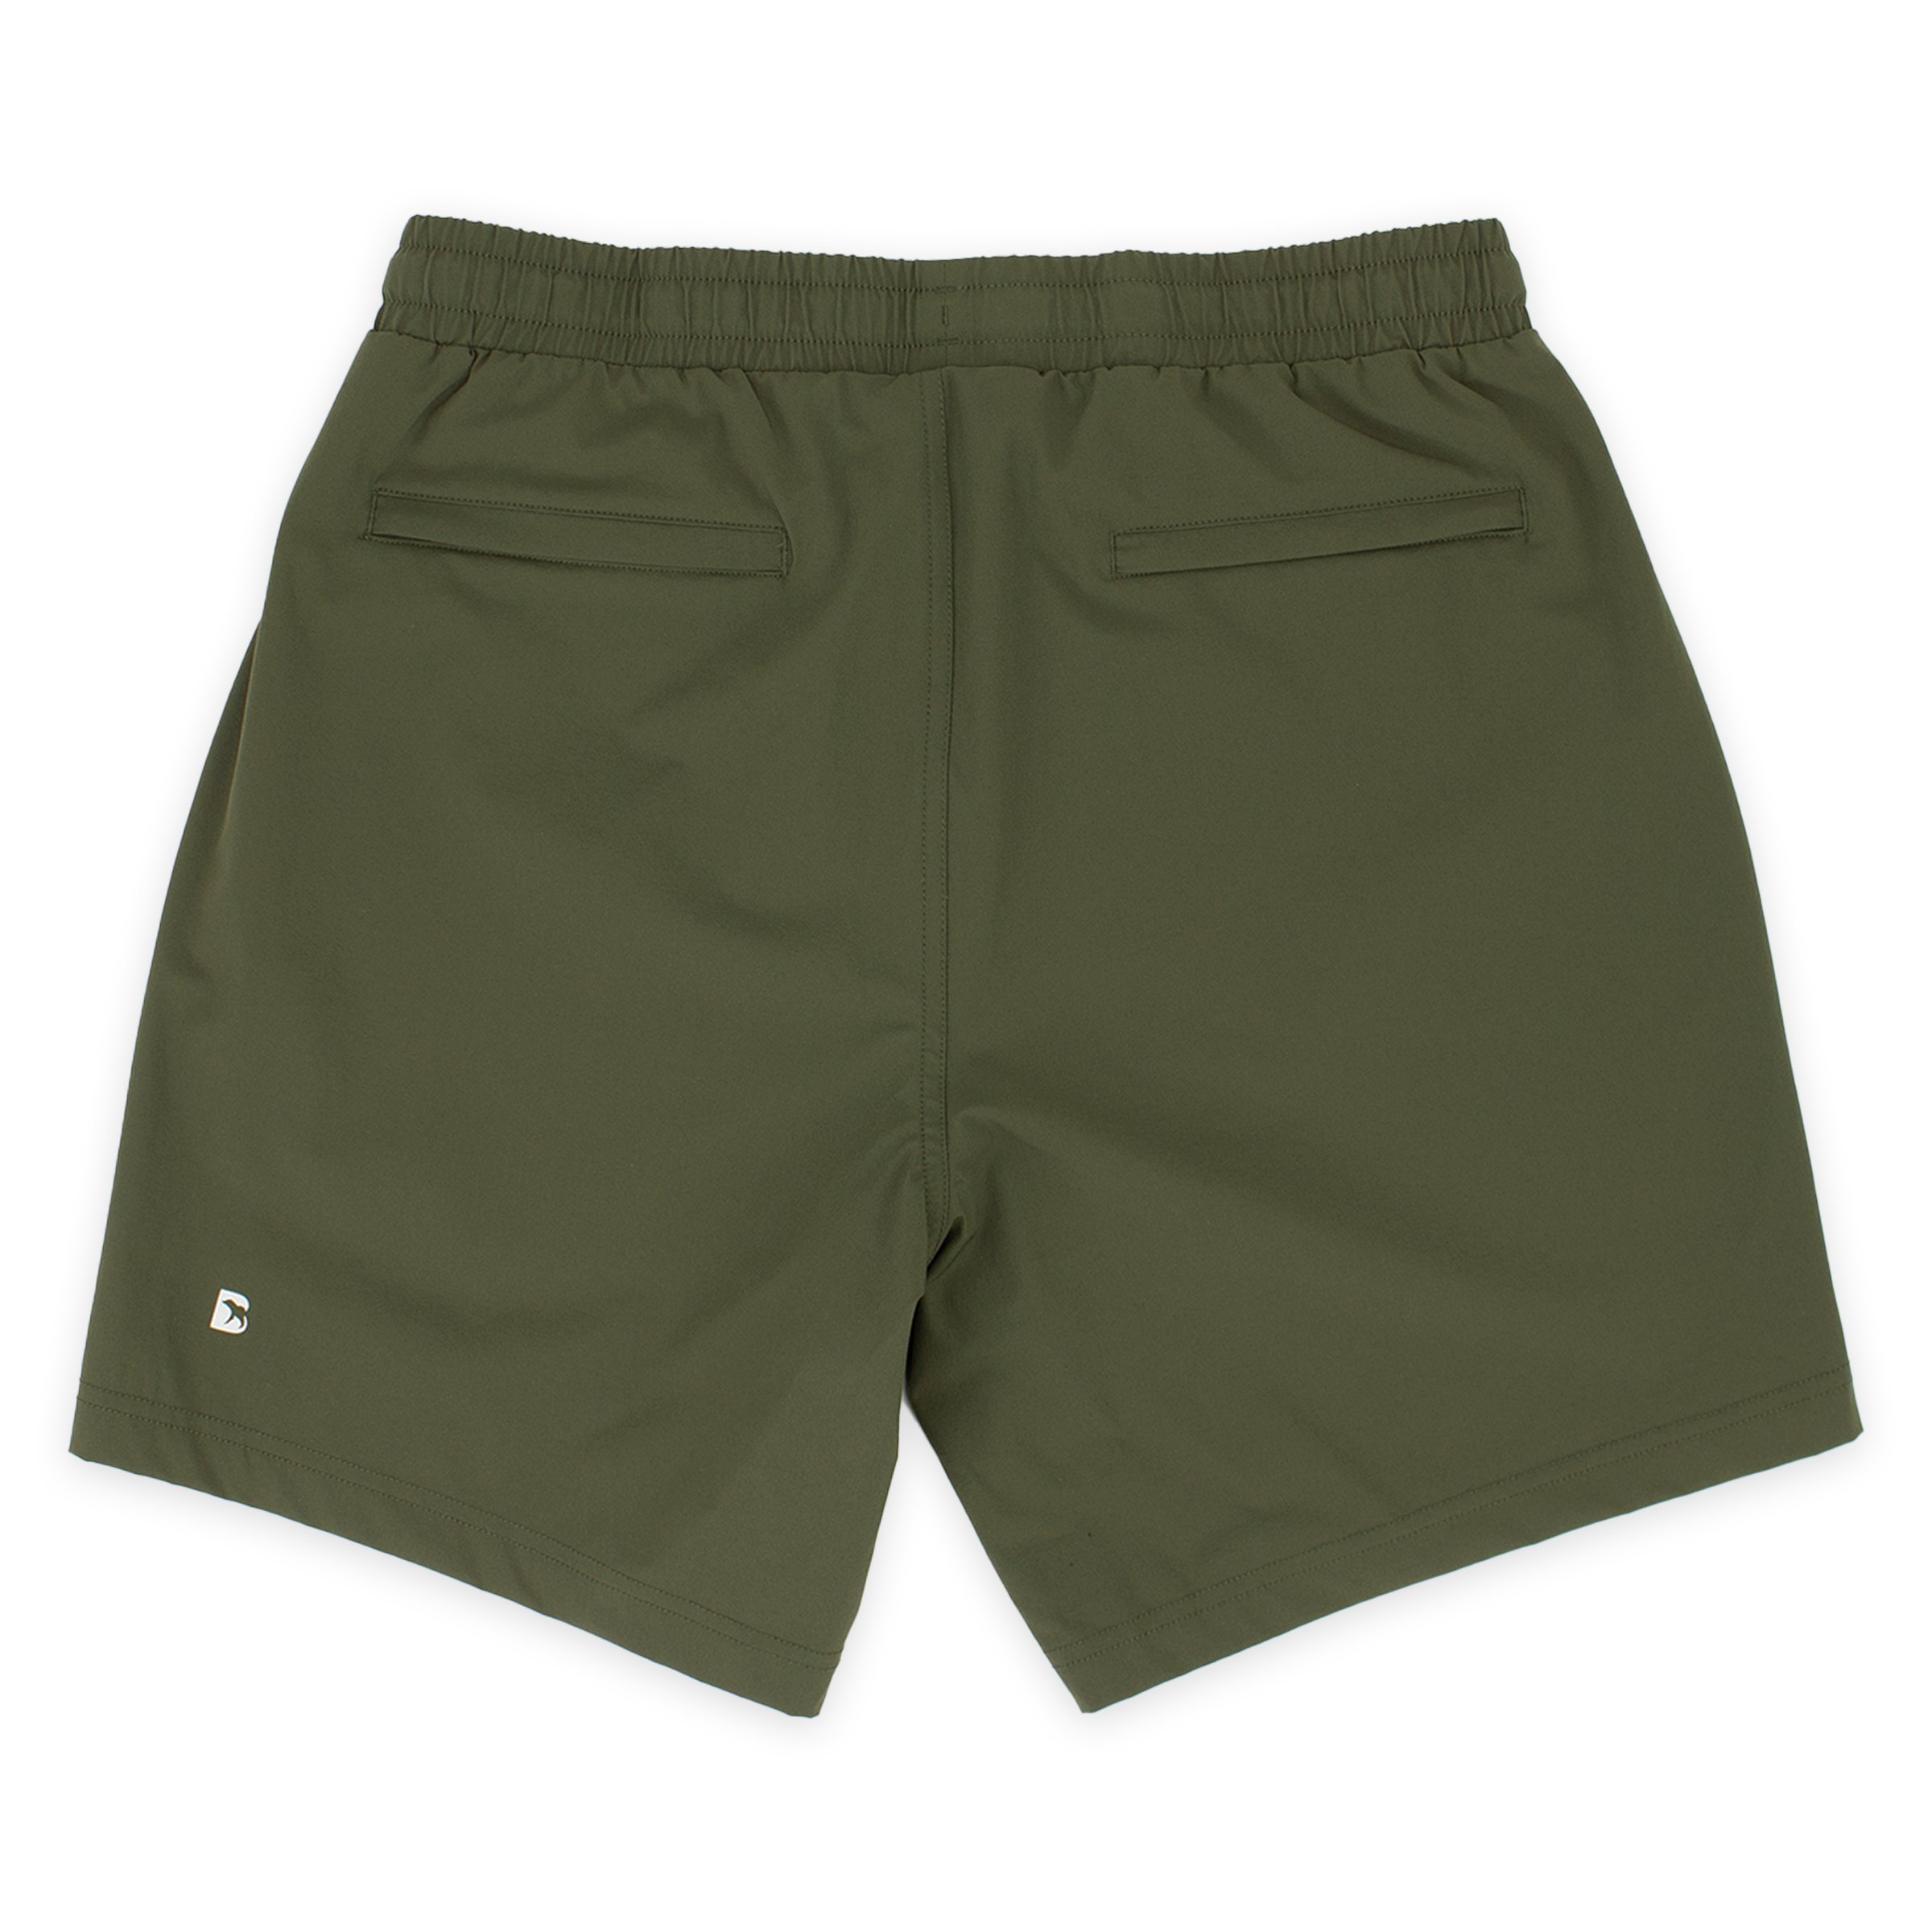 Base Short 7" Military Green with 2 zipper back pockets and reflective logo